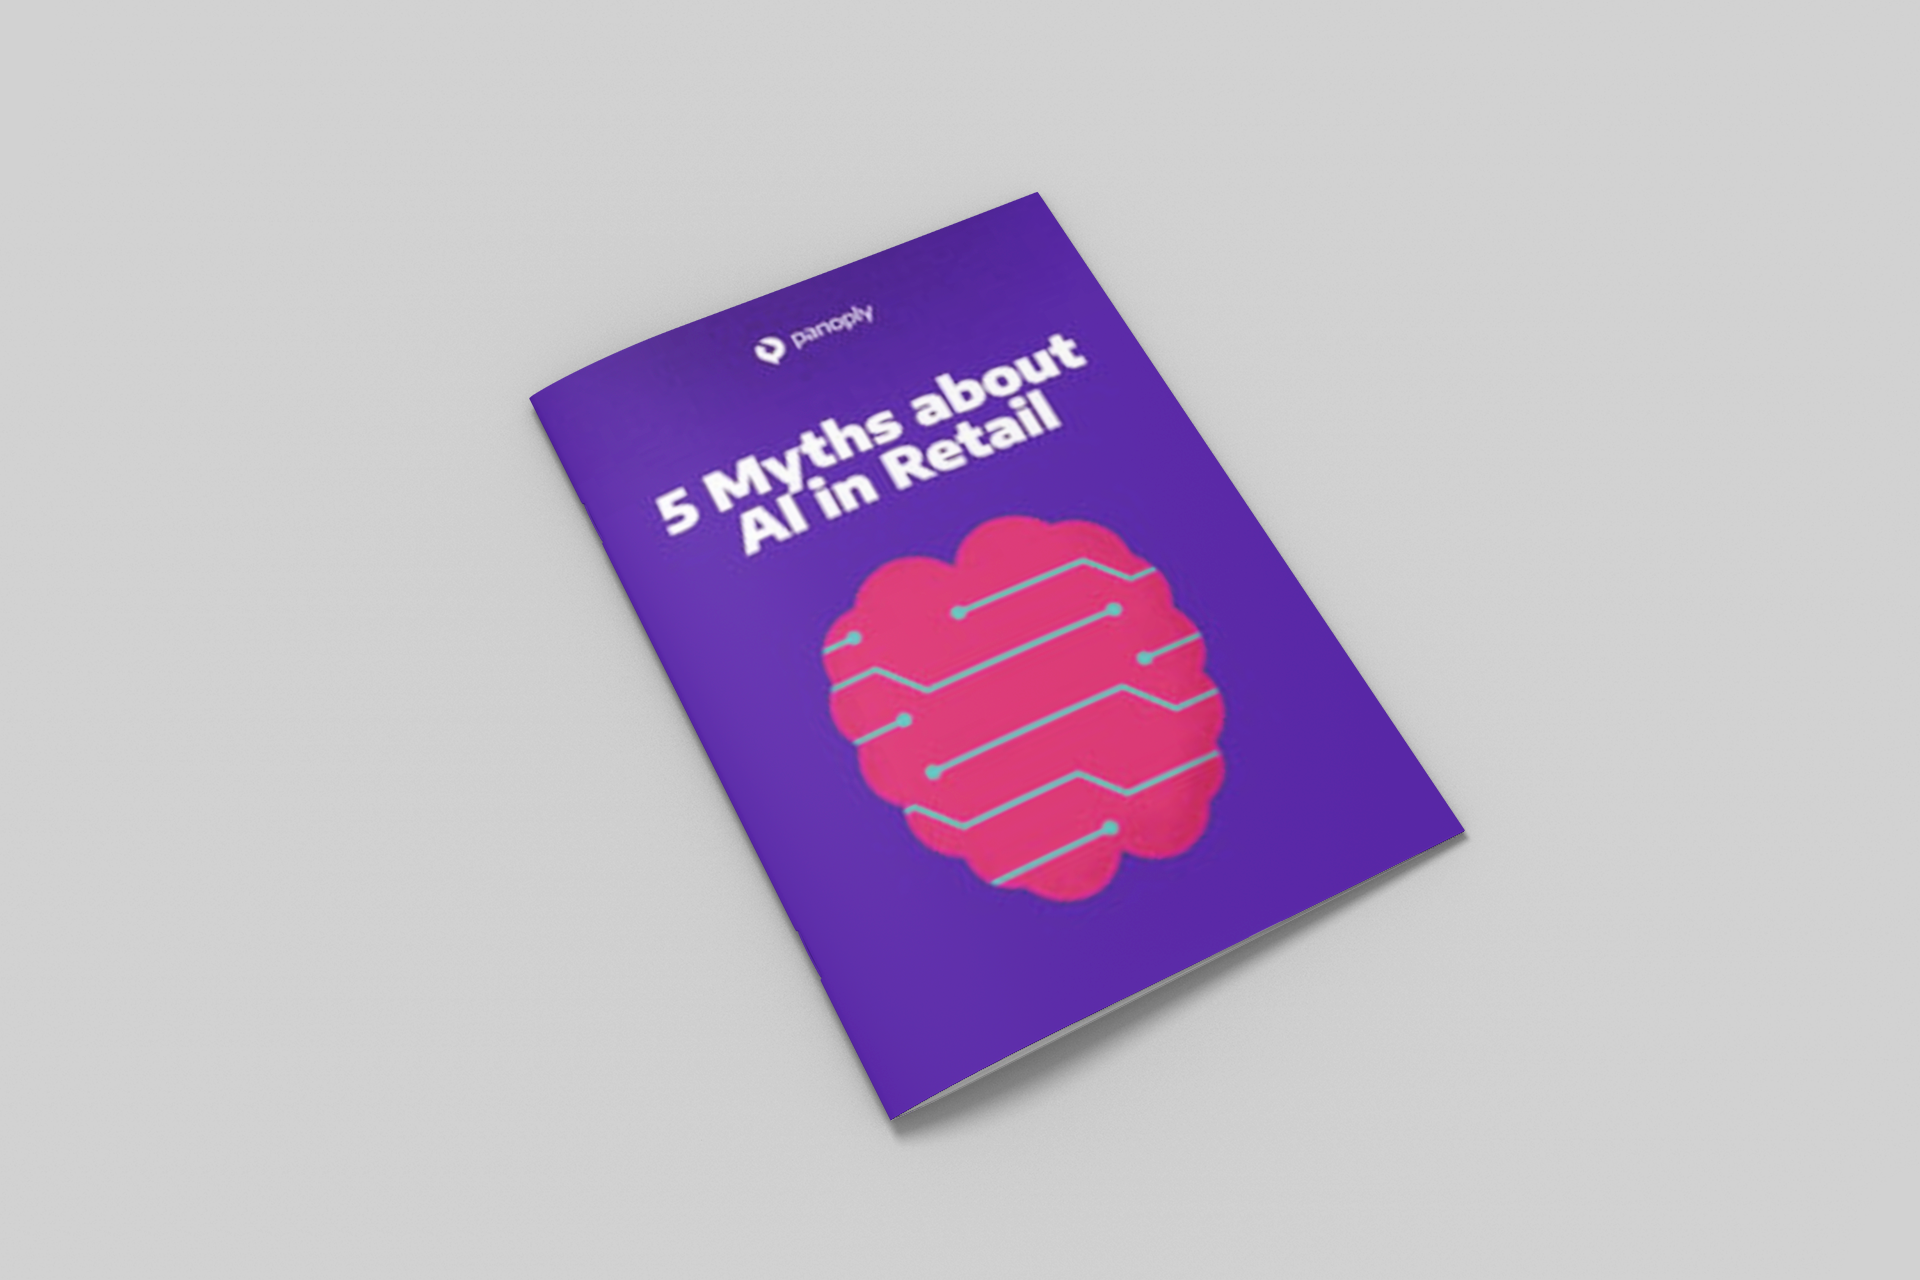 With all the hype around how artificial intelligence is revolutionizing the retail industry, it can be hard to separate fact from (science) fiction. In this ebook, we debunk the top 5 myths about AI in retail